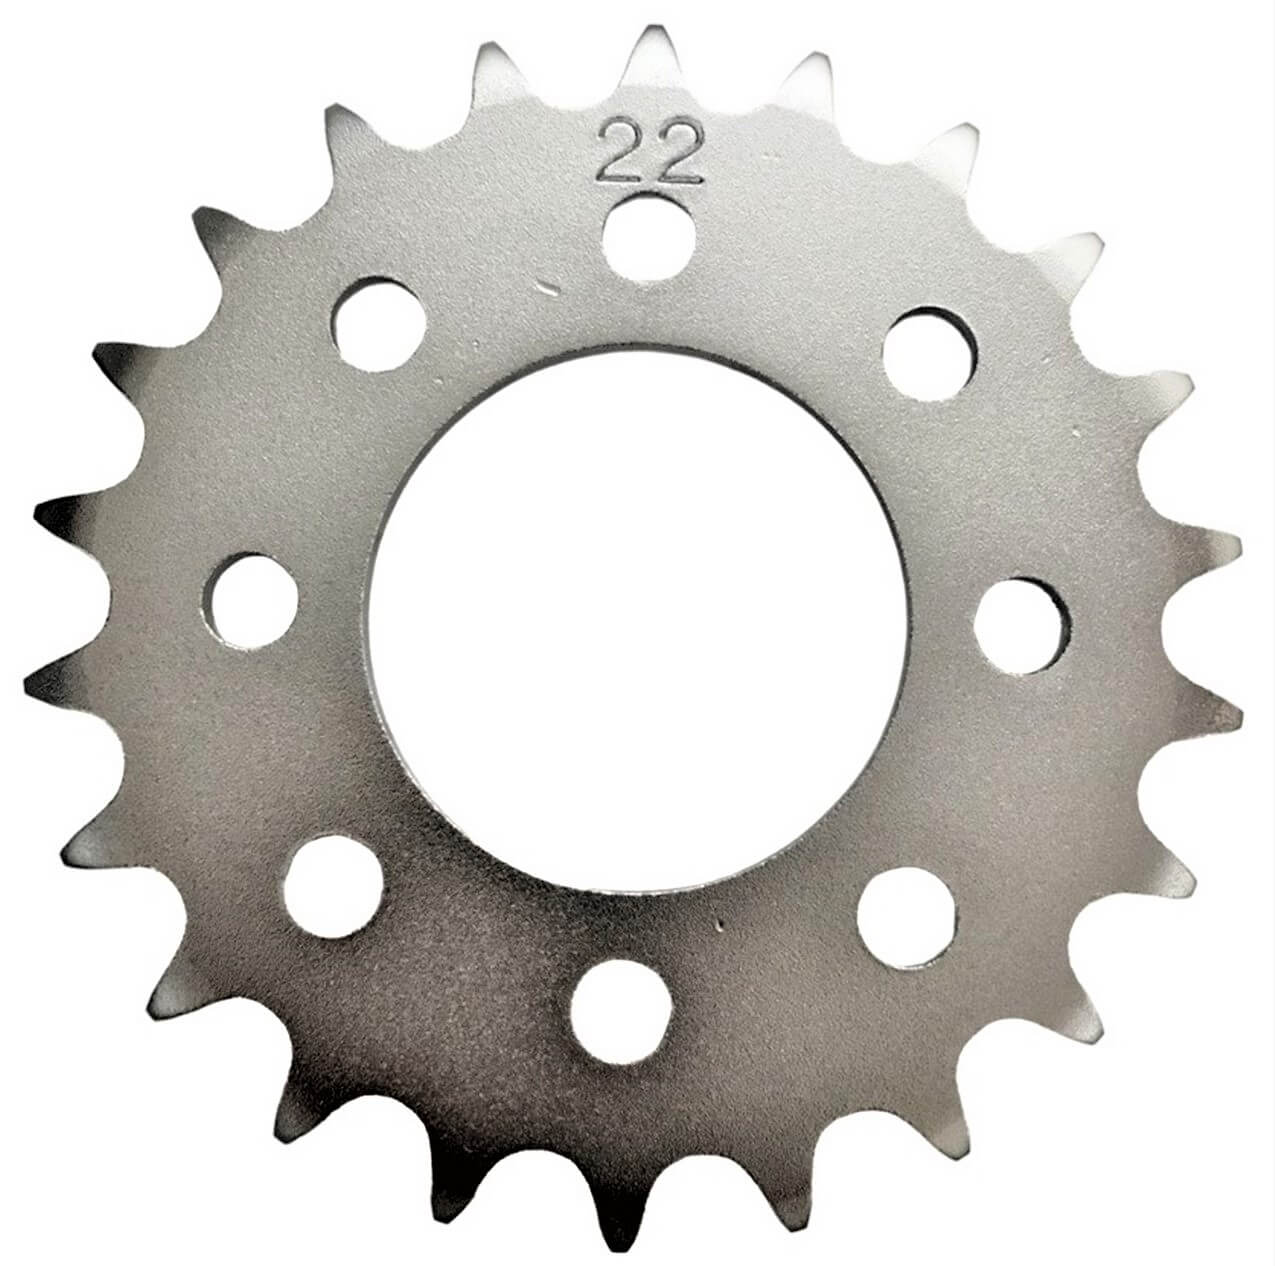 Rear Sprocket #415HD 22th Bolt Pattern=8 holes each are 24mm Ctr to Ctr, Shaft=42mm TOMOS A35/A55 - Click Image to Close